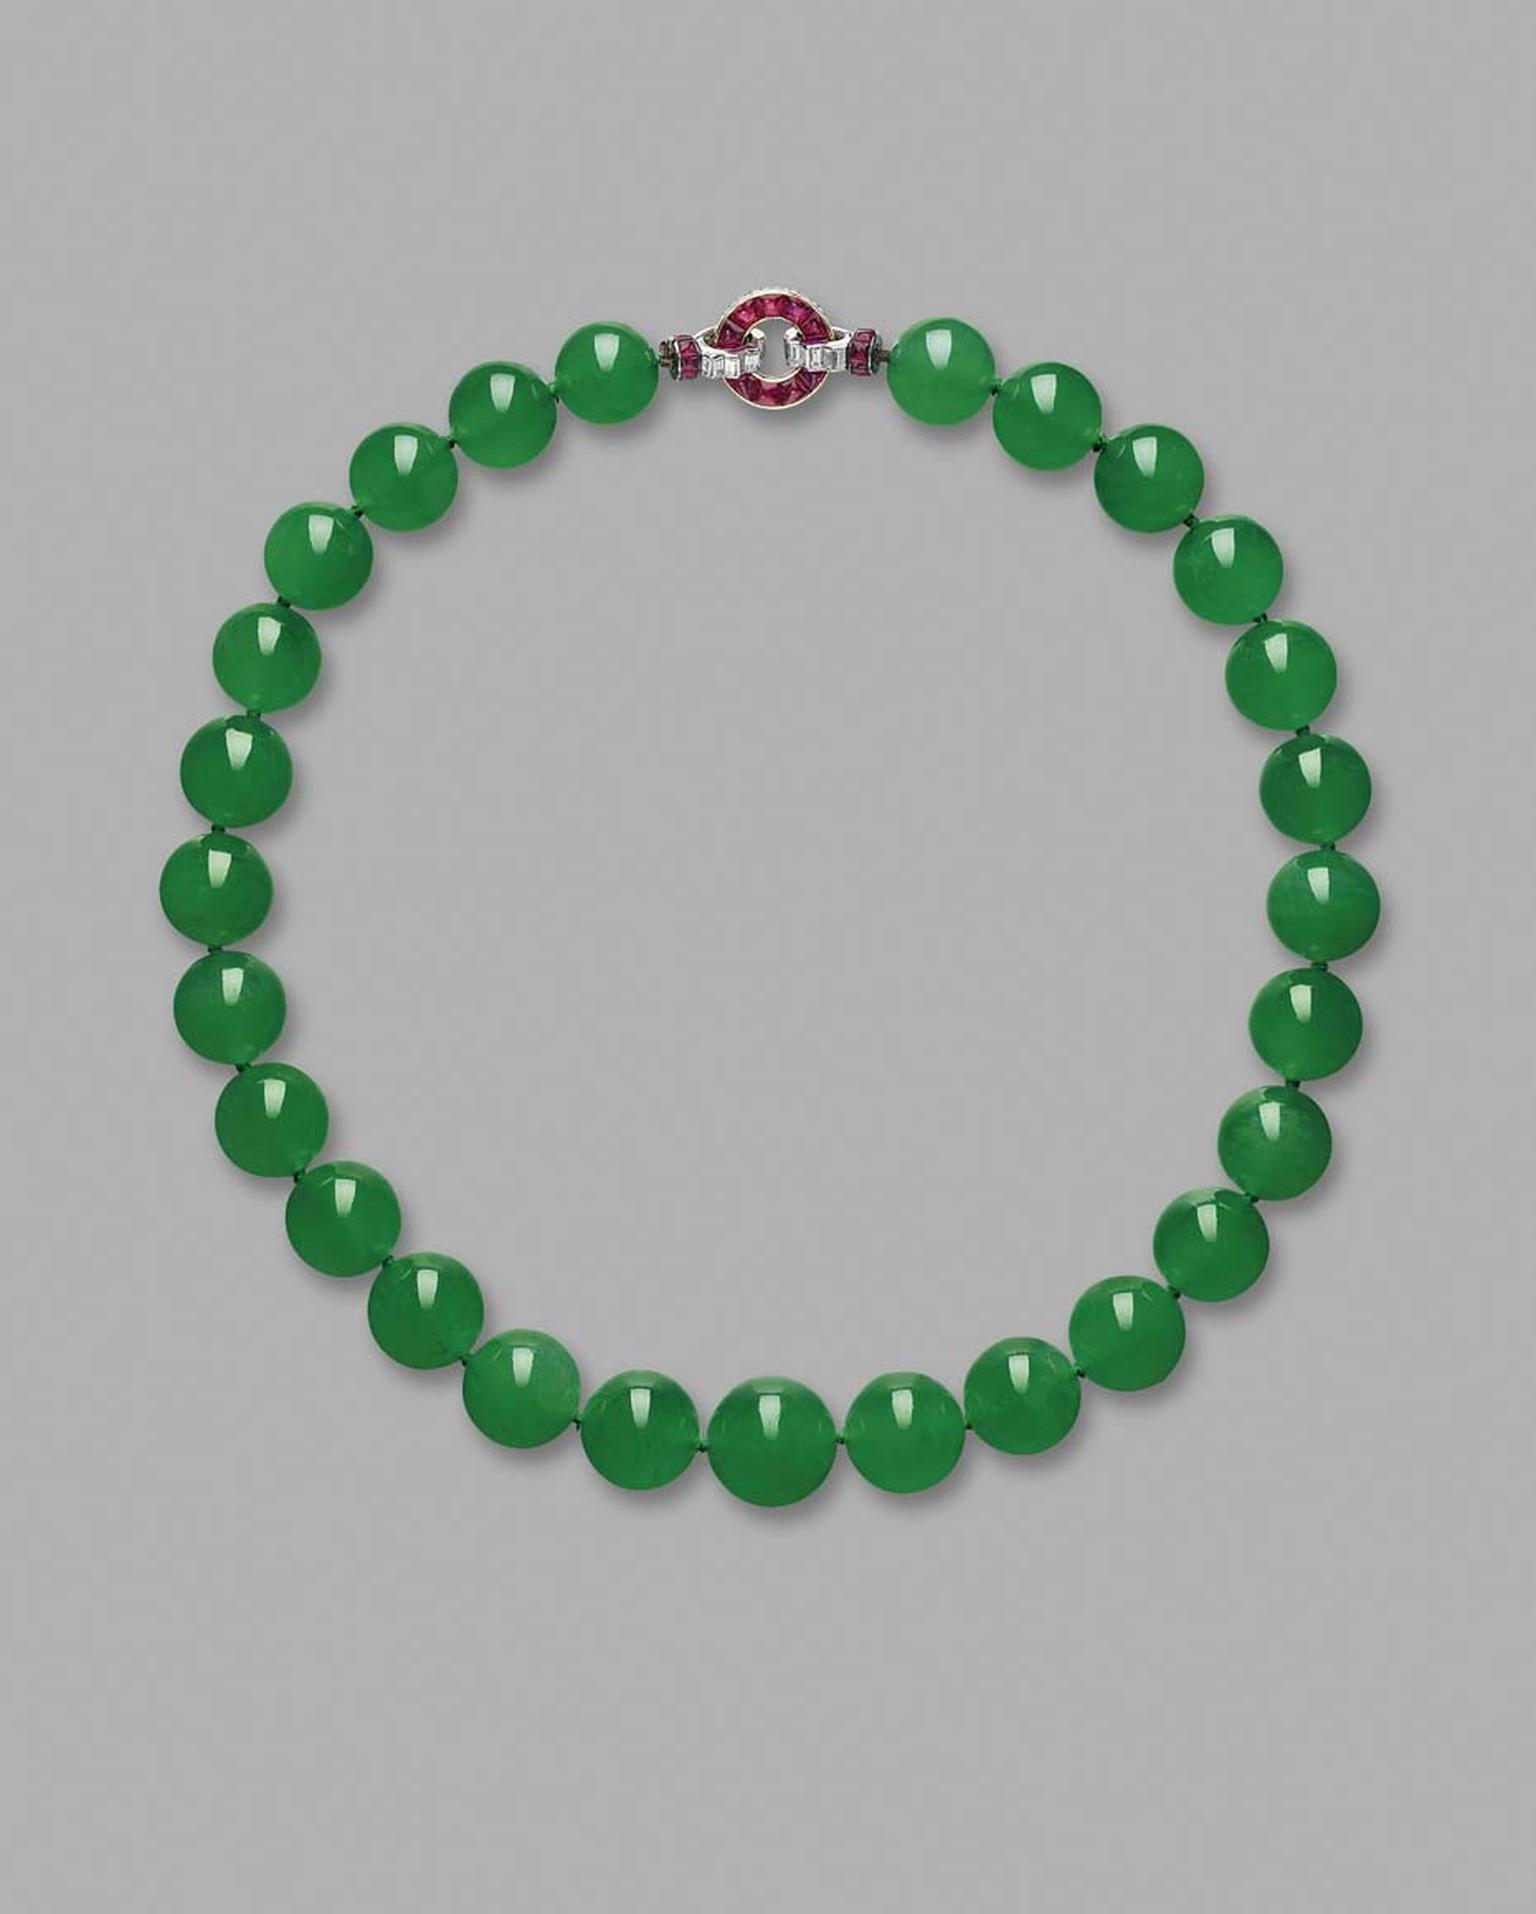 The historical Hutton-Mdivani Jadeite Bead necklace, once owned by socialite and Woolworth heiress Barbara Hutto, becomes the highest price ever paid for a jadeite jewel of US$27.44 million at Sotheby's Hong Kong